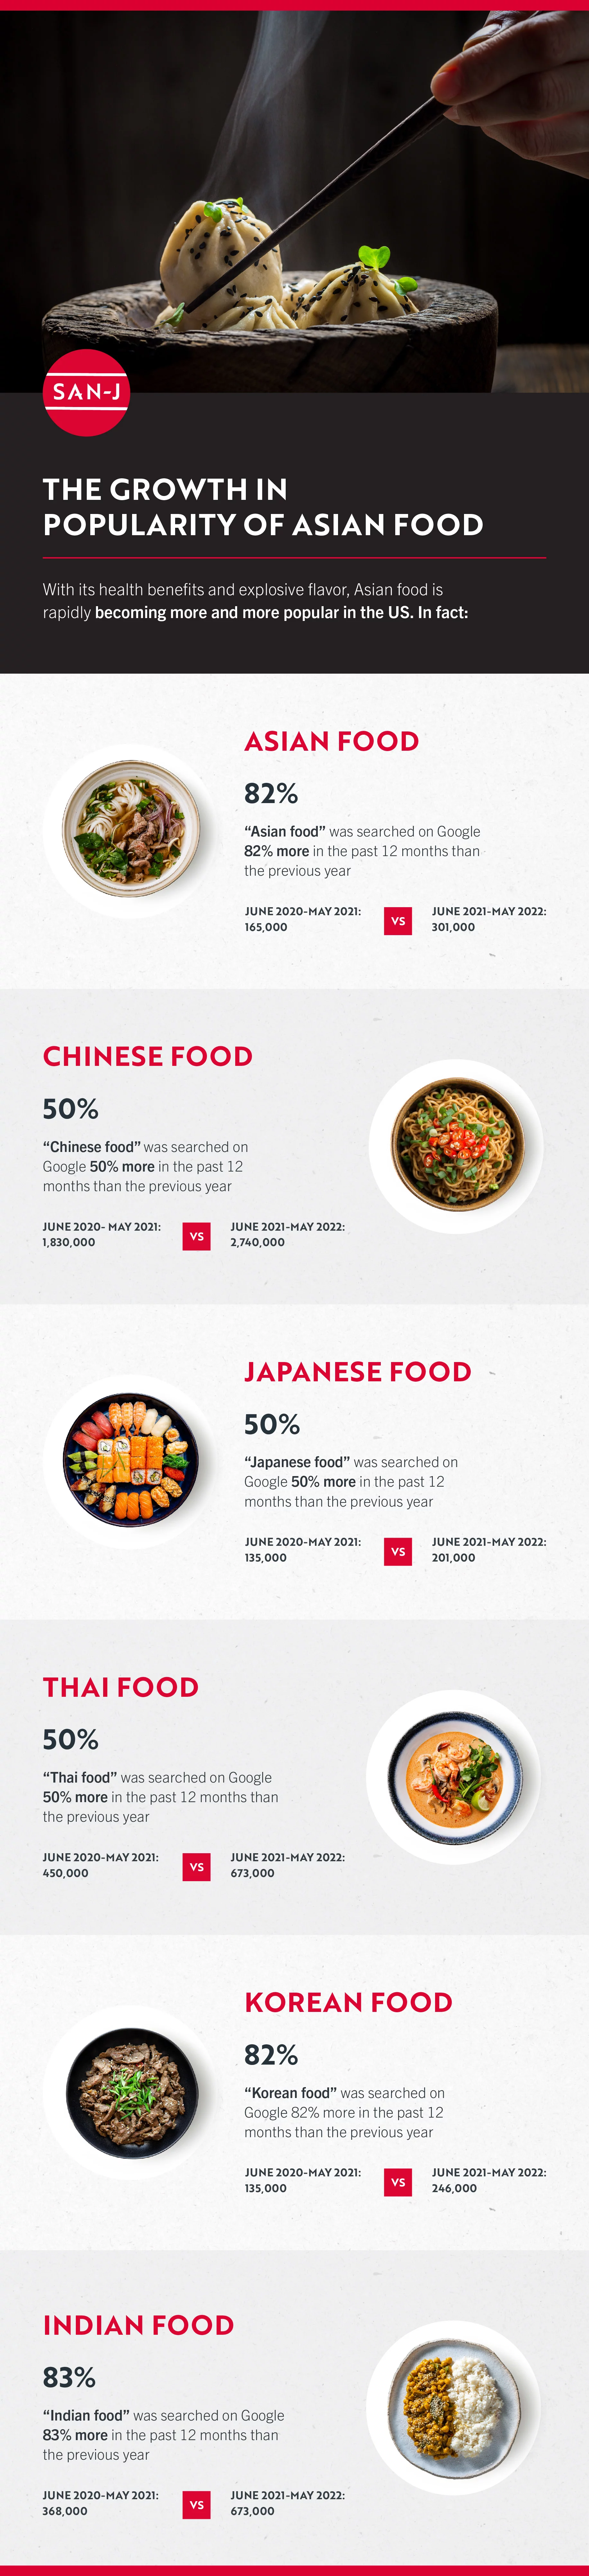 https://san-j.com/wp-content/uploads/2023/04/MG-The-Growth-in-Popularity-of-Asian-Food-1.jpg